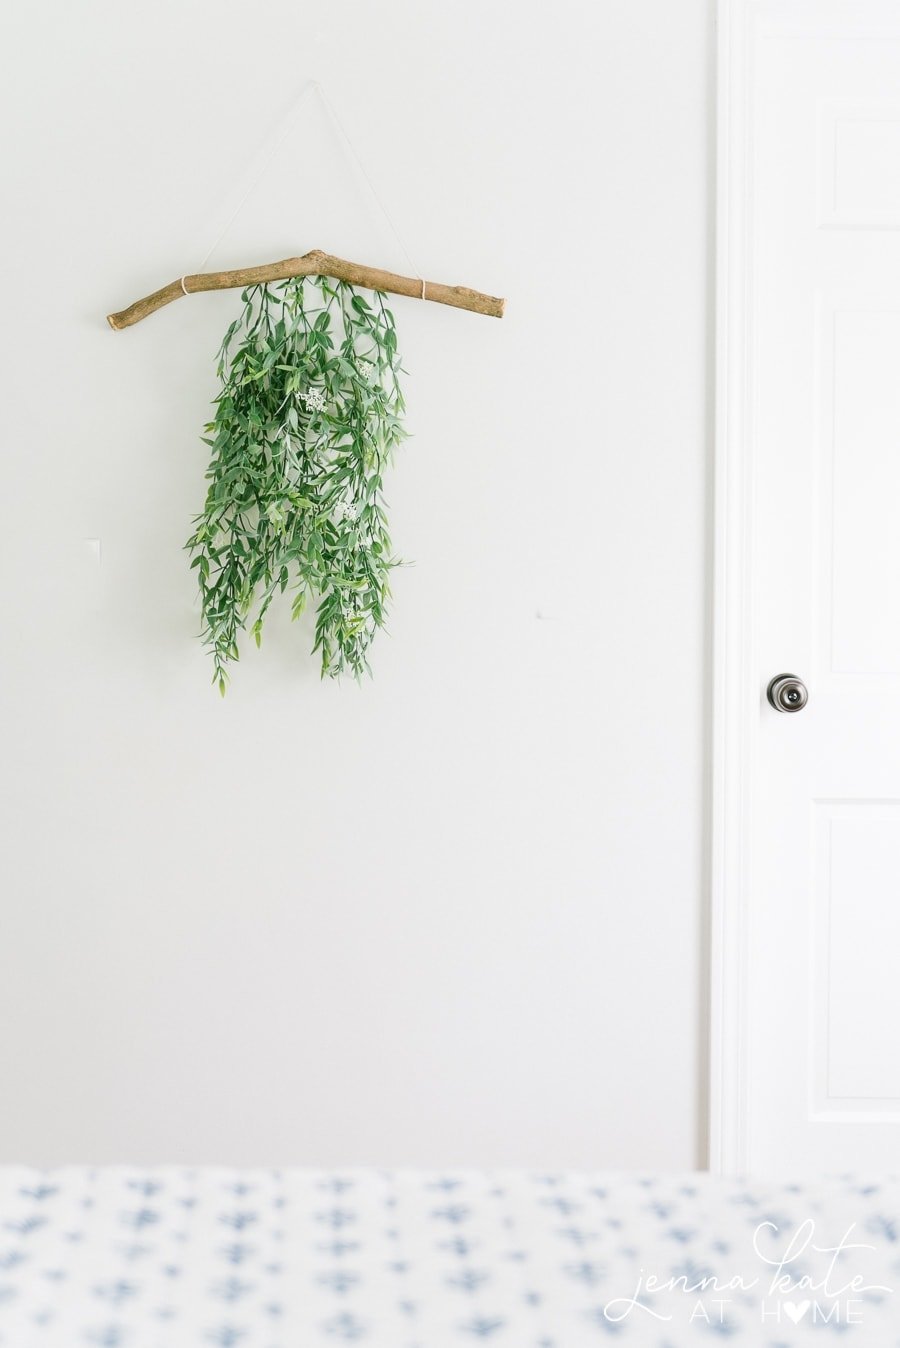 A loose arrangement of greenery hanging from a branch, hung on the wall